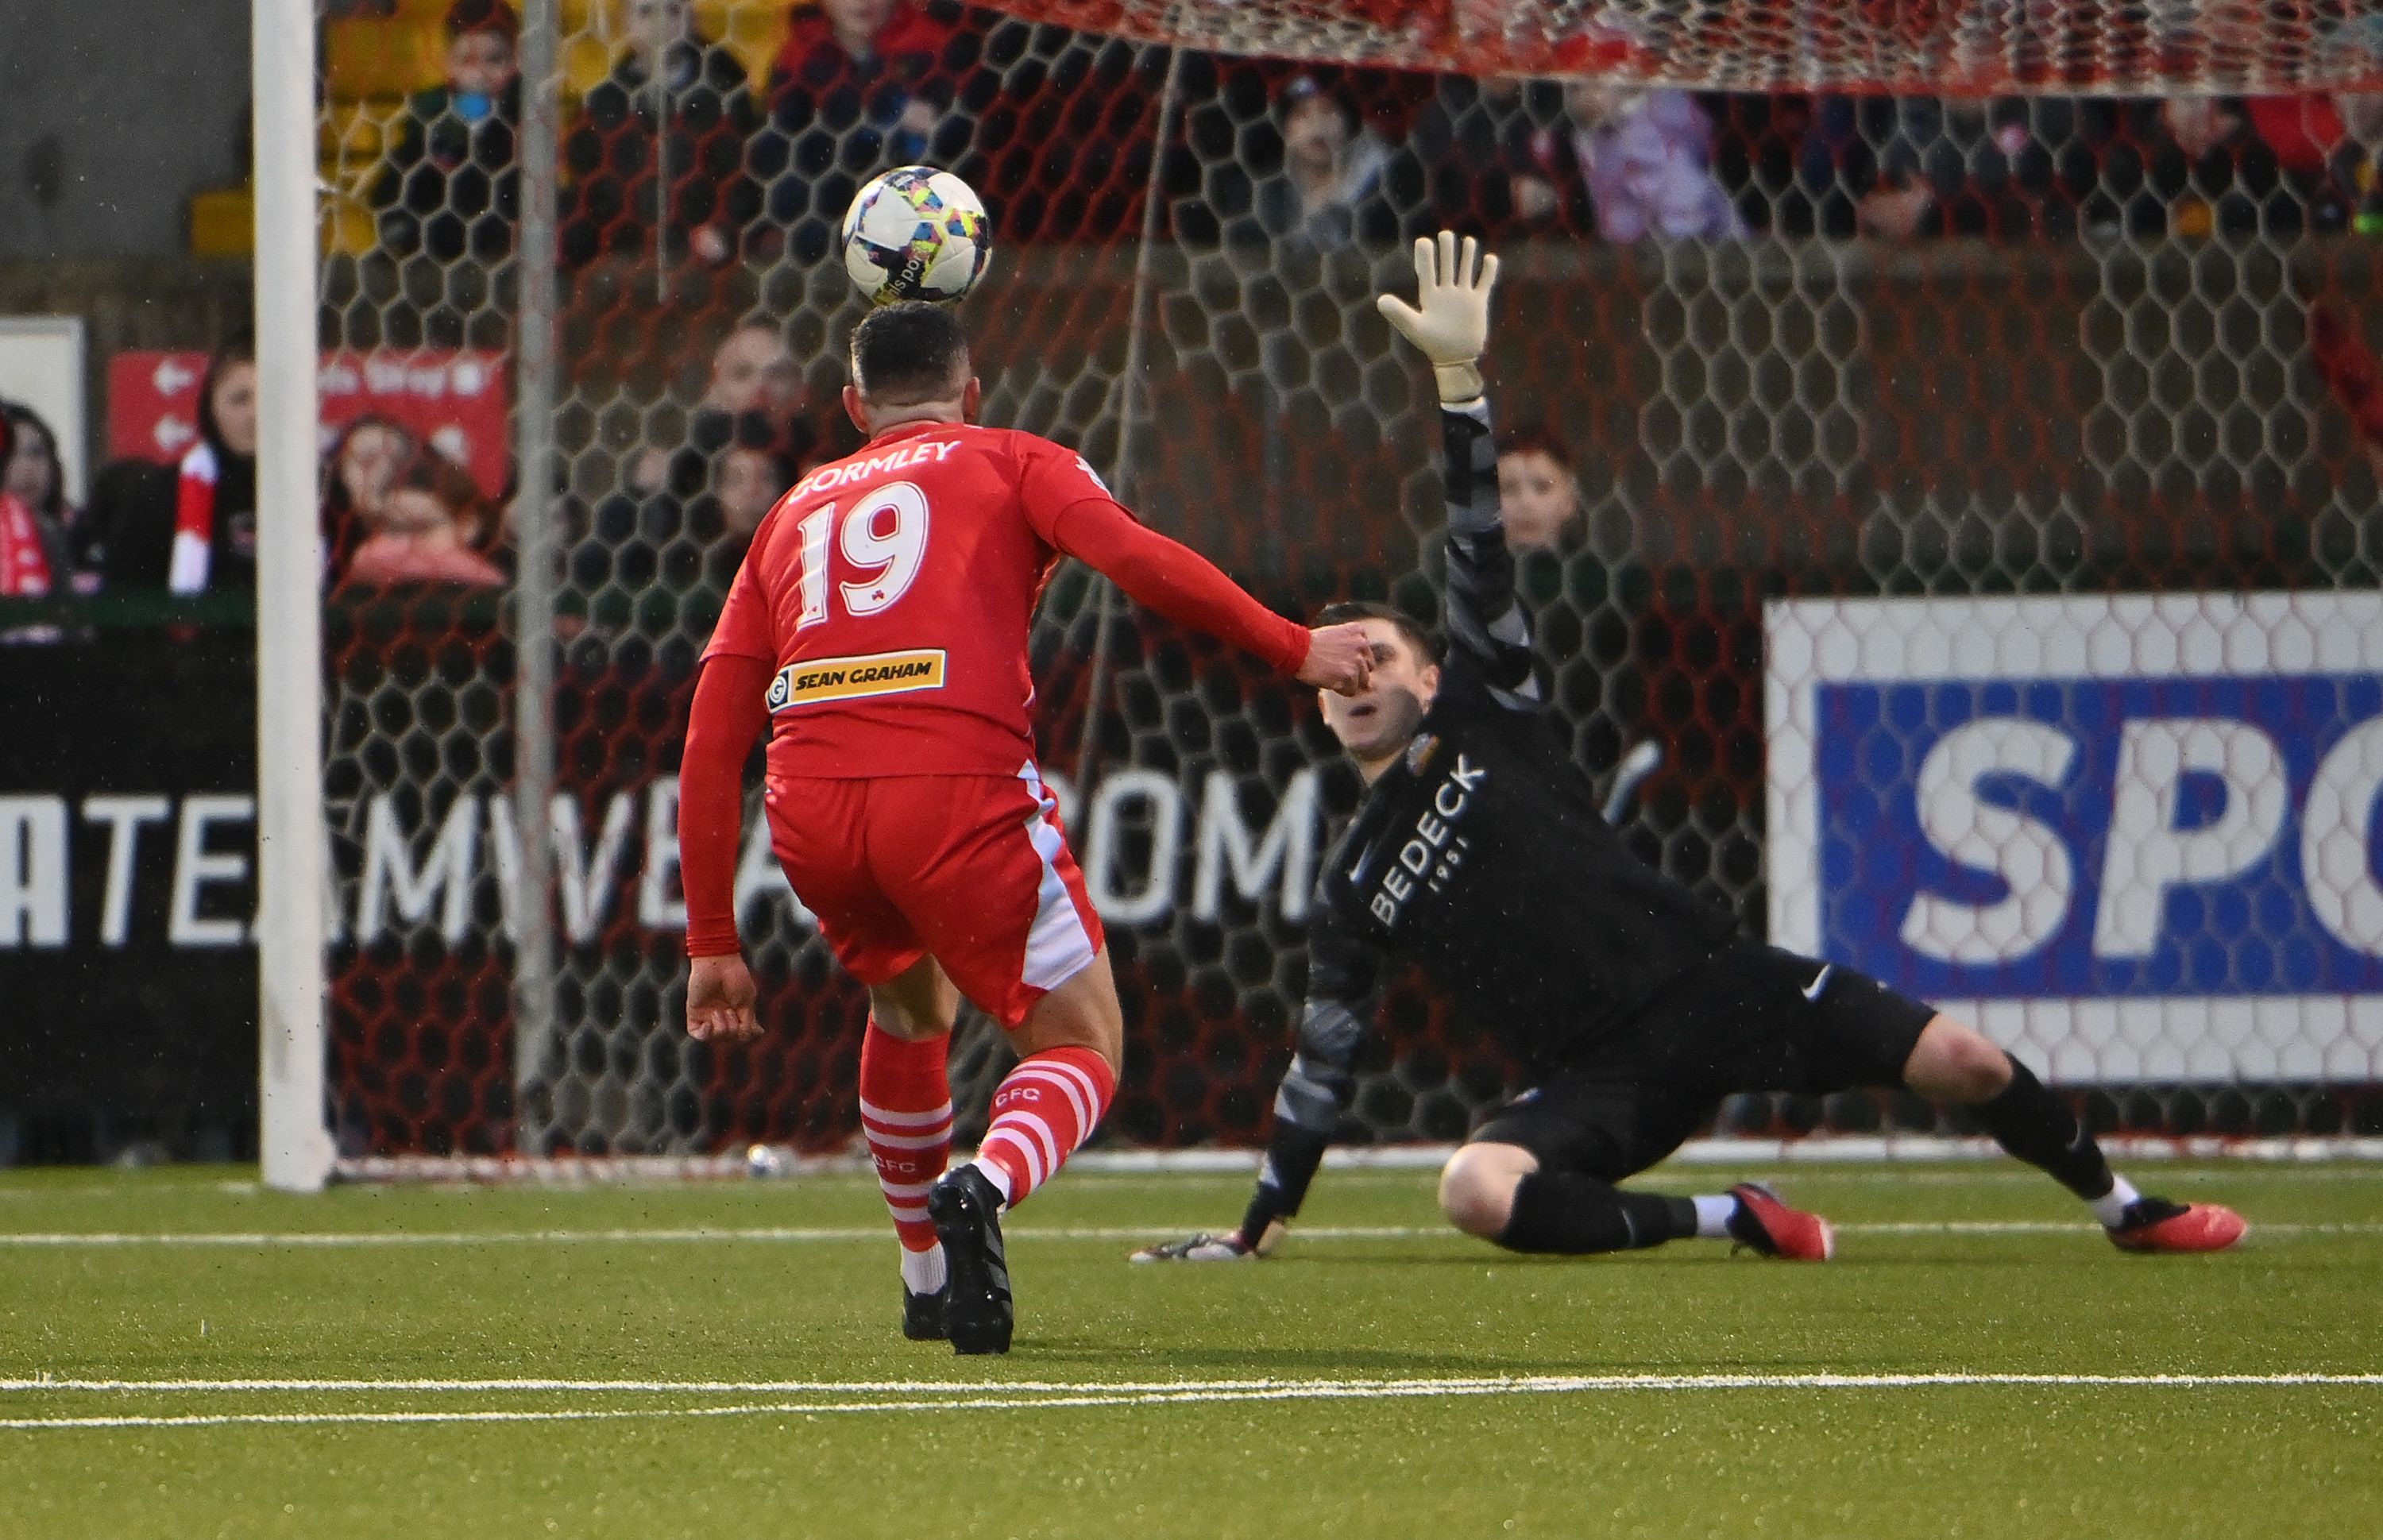 Joe Gormley seals Cliftonville\'s win in stoppage time 